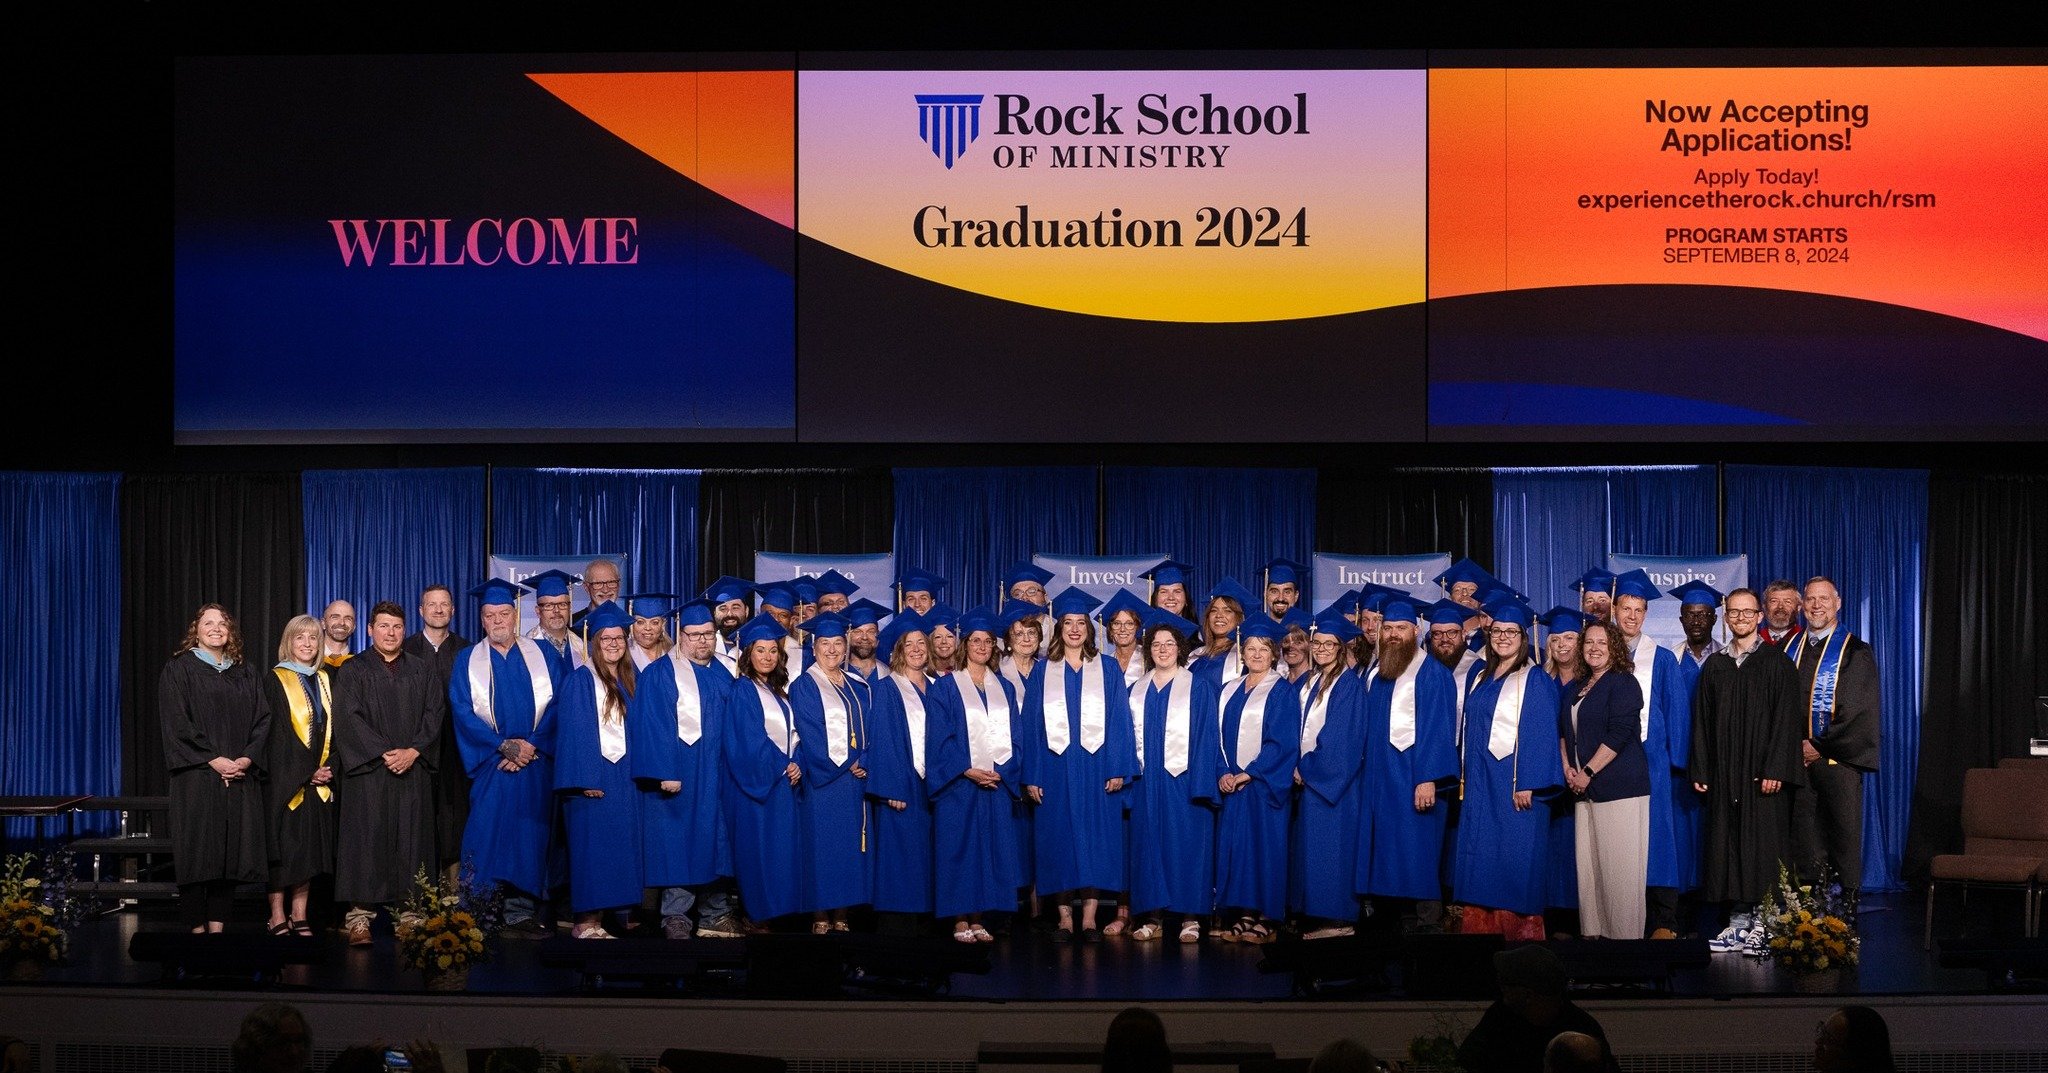 Congratulations to our Rock School of Ministry graduating class of 2024! 🎓🙌 

&quot;Care for the flock that God has entrusted to you. Watch over it willingly, not grudgingly - not for what you will get out of it, but because you are eager to serve 